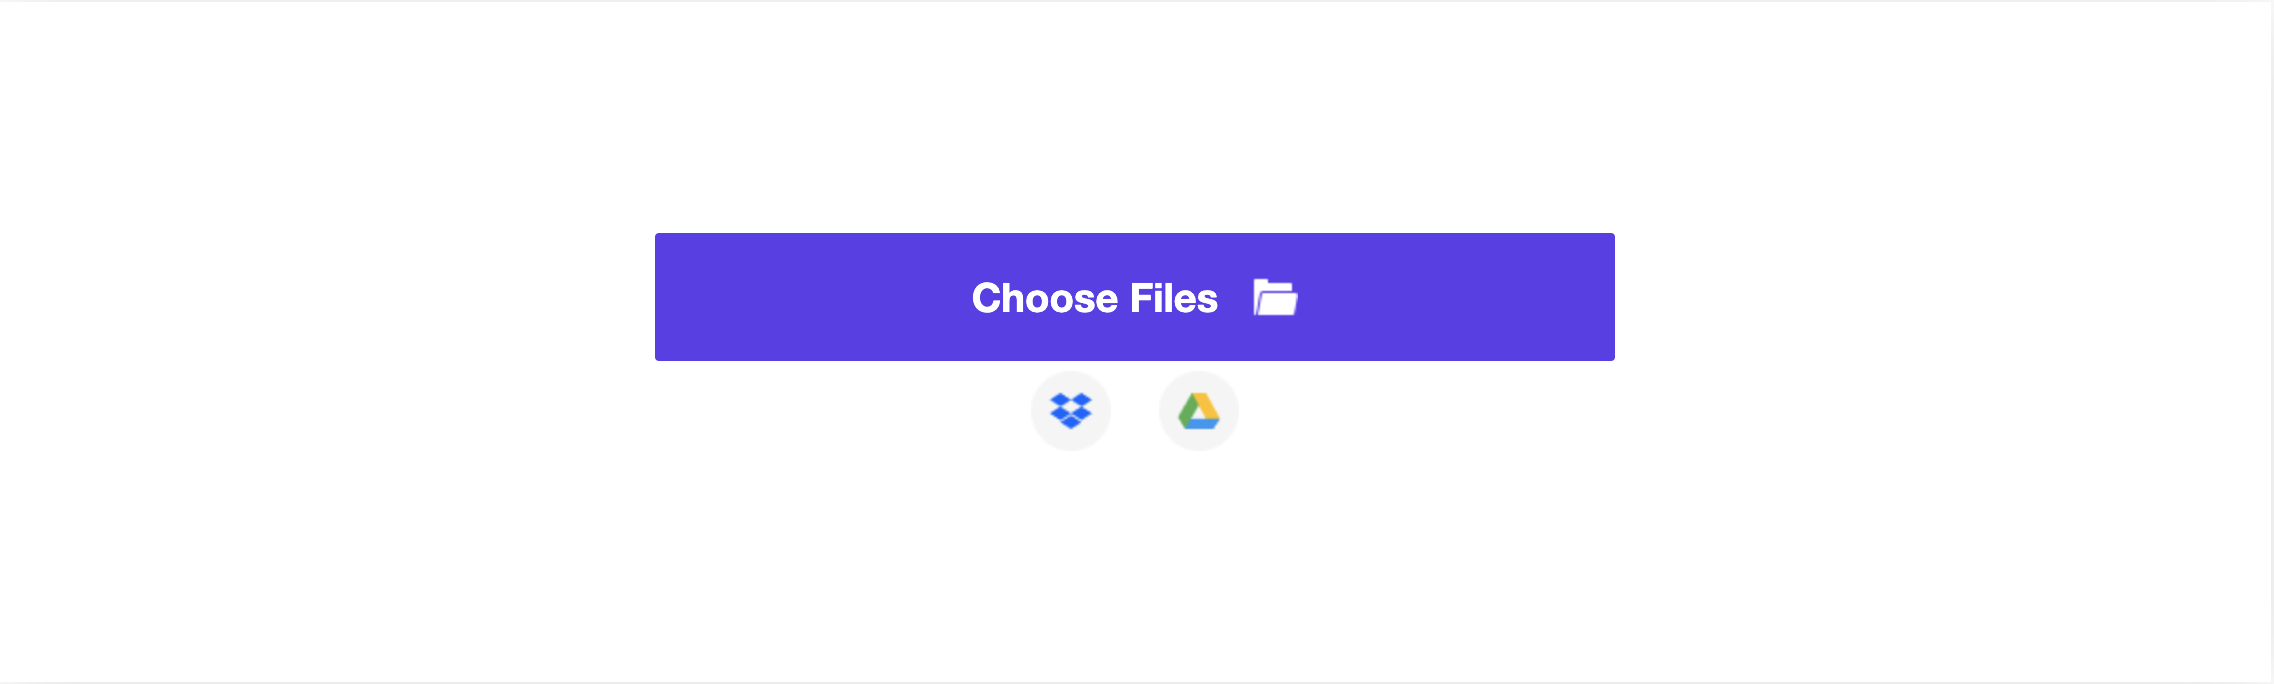 upload GIF file to compress